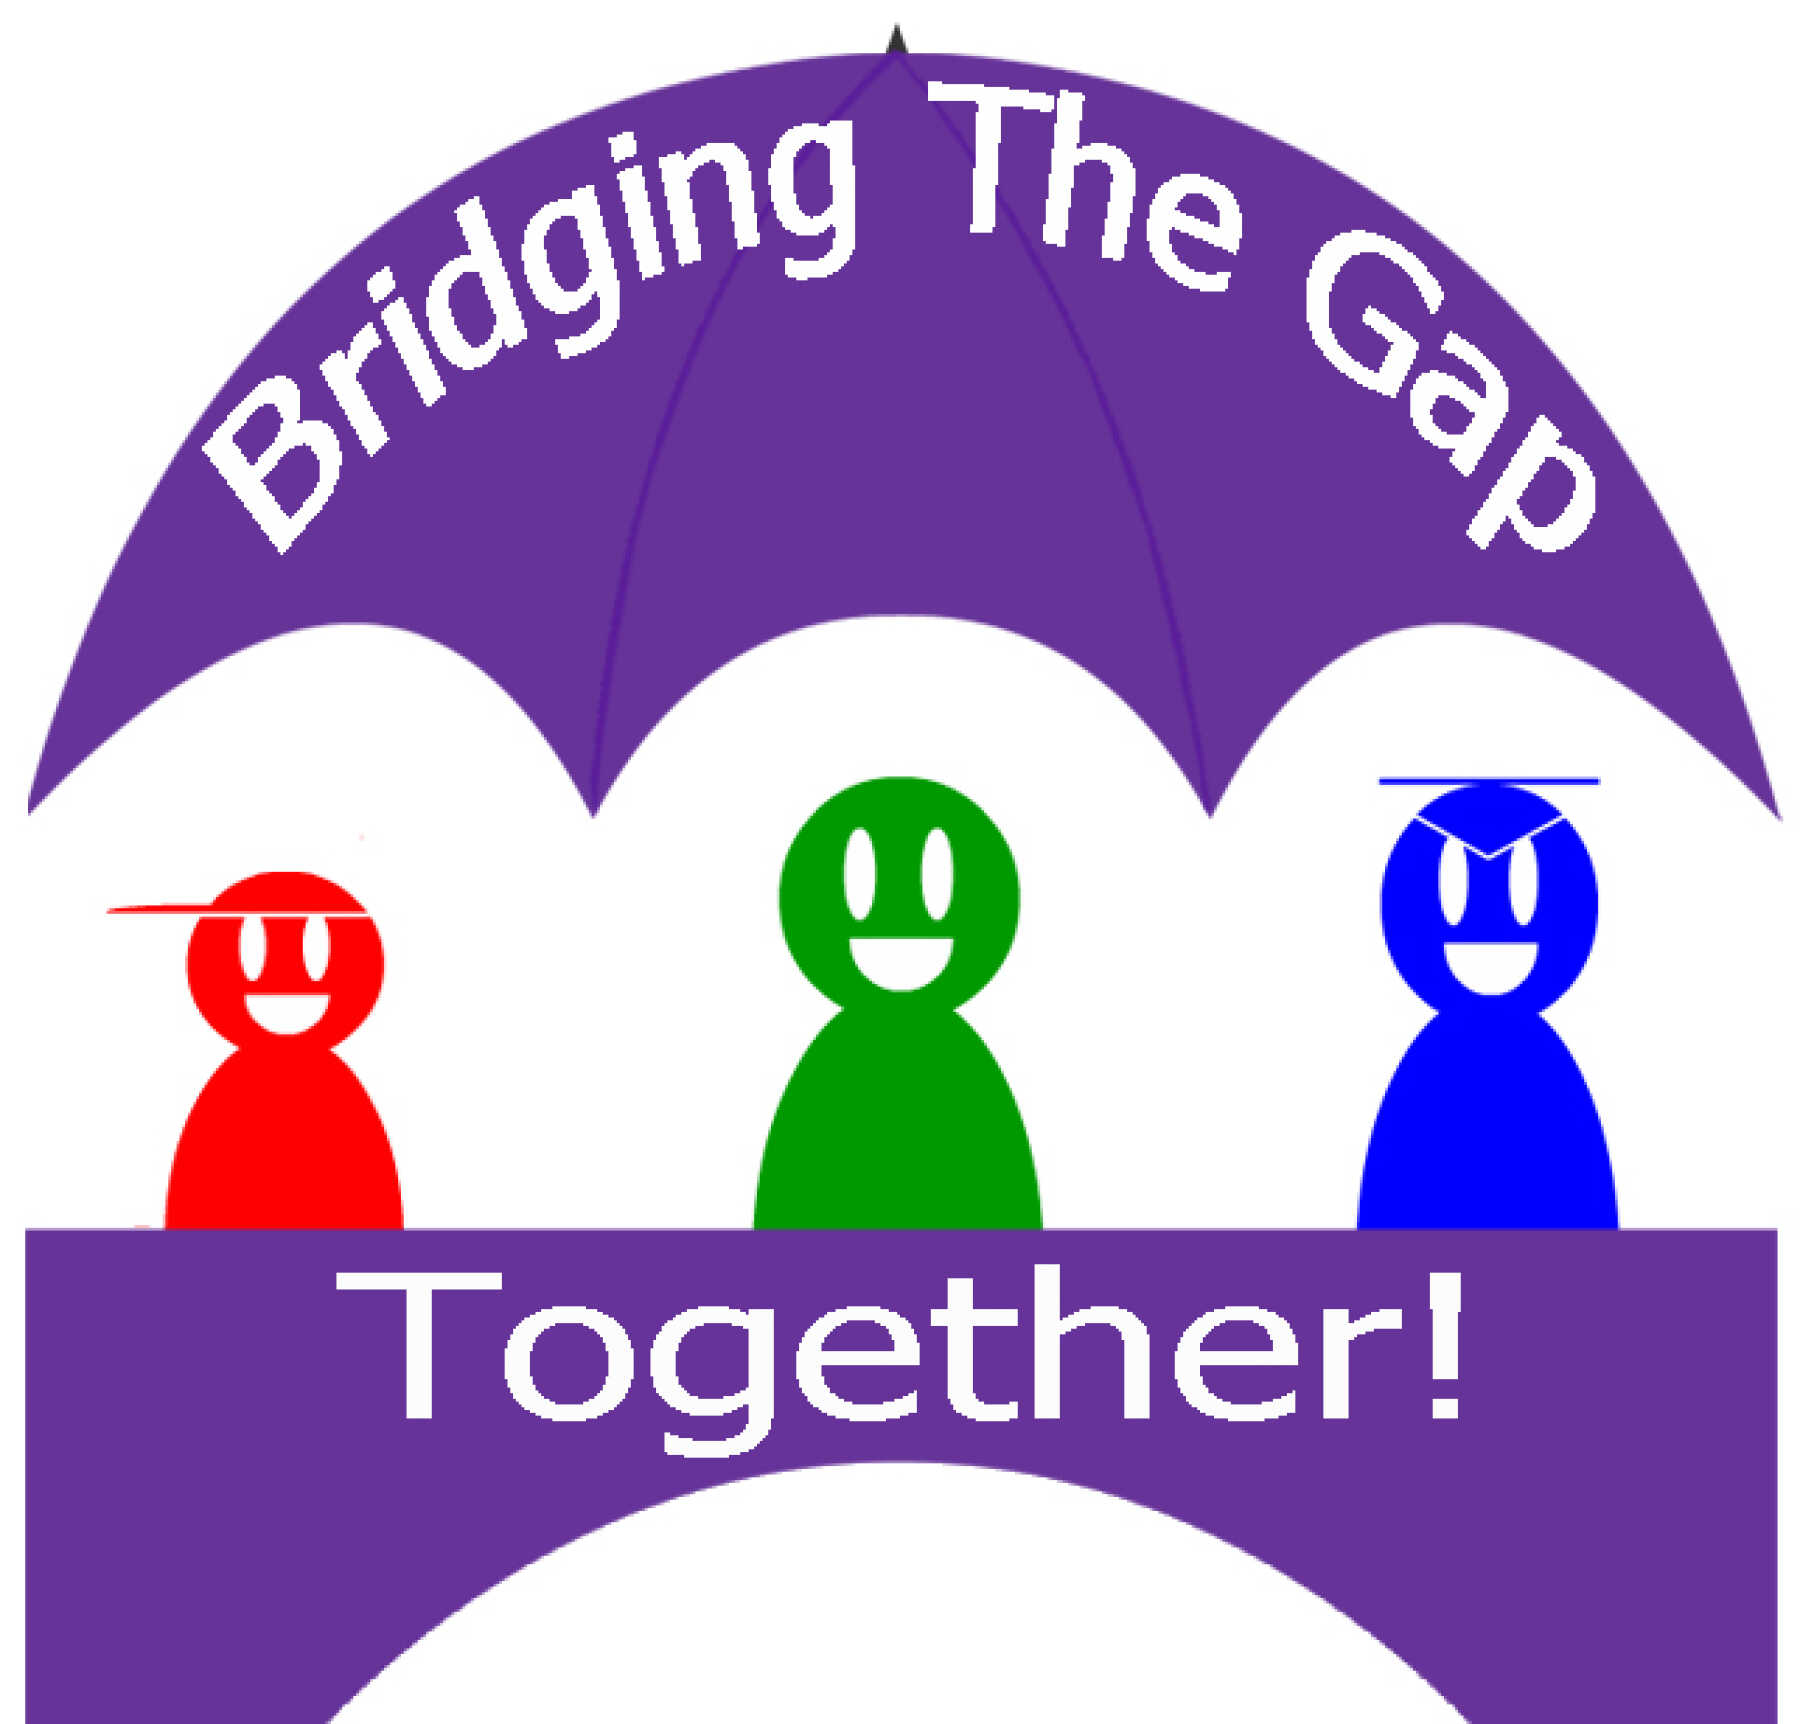 Featured Image for Bridging The Gap Together!